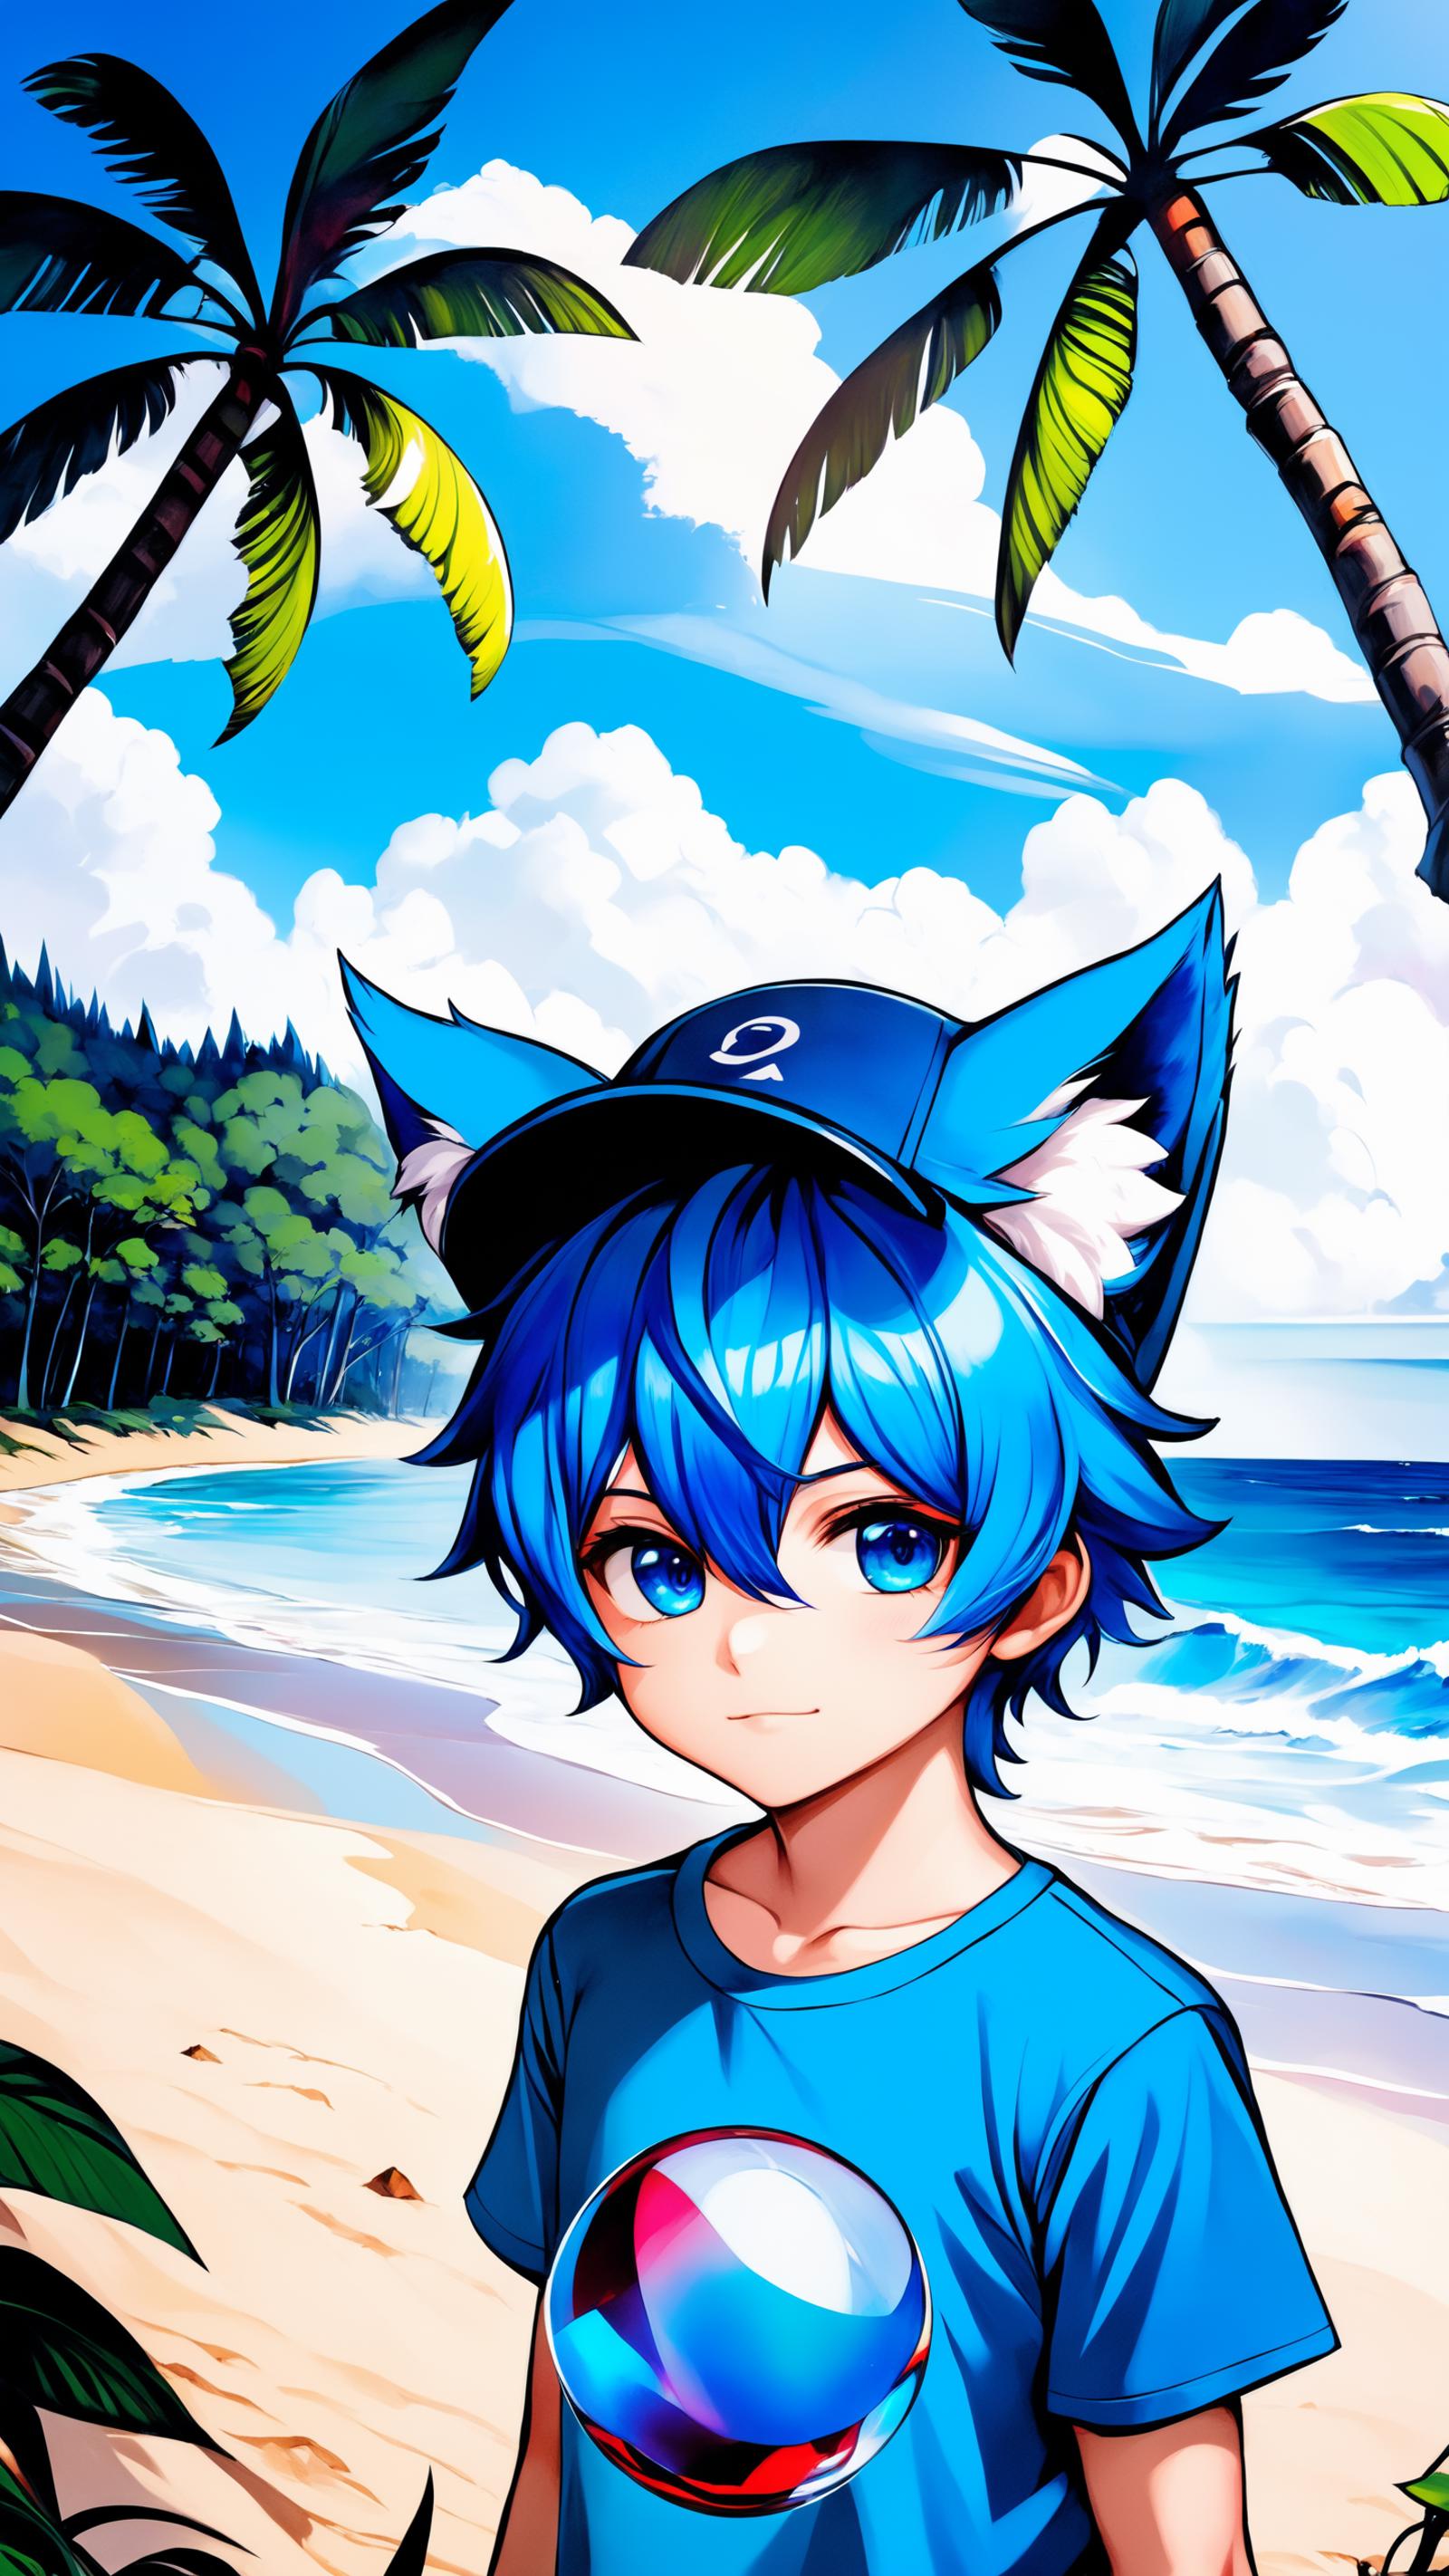 A blue-haired young boy wearing a blue cap and a blue shirt is smiling, standing on a beach.